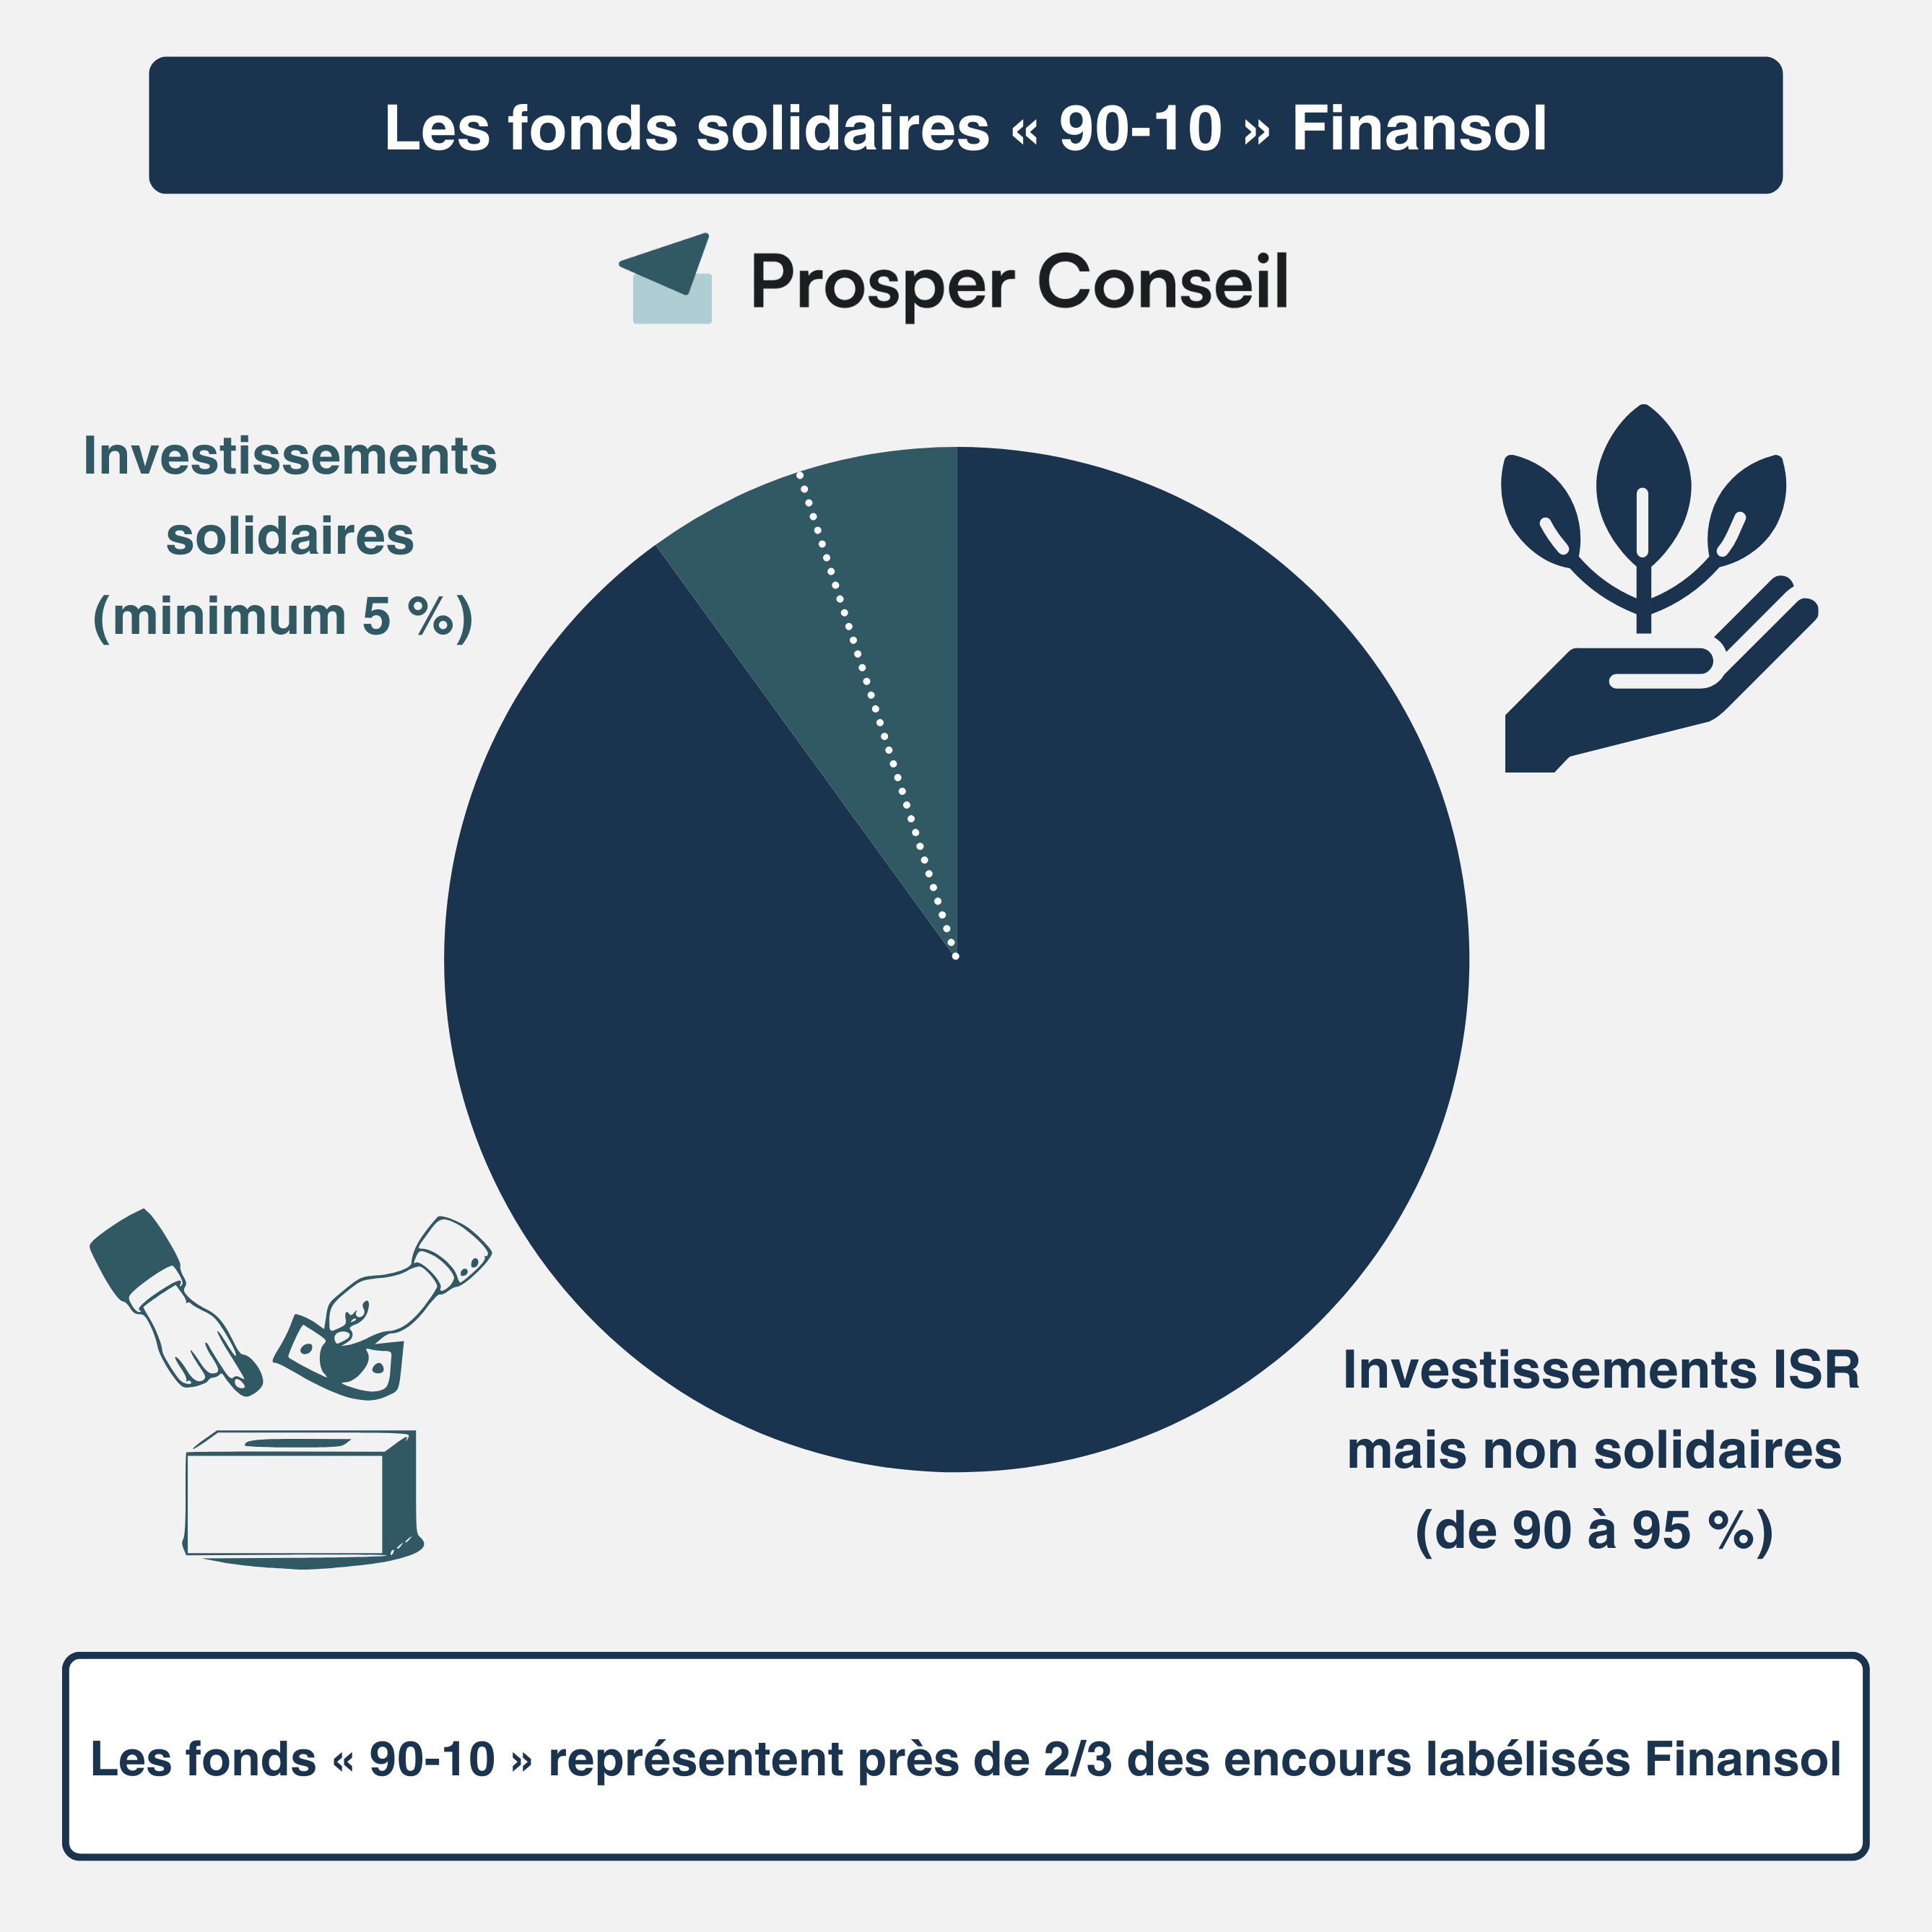 Fonds solidaires 90-10 finansol